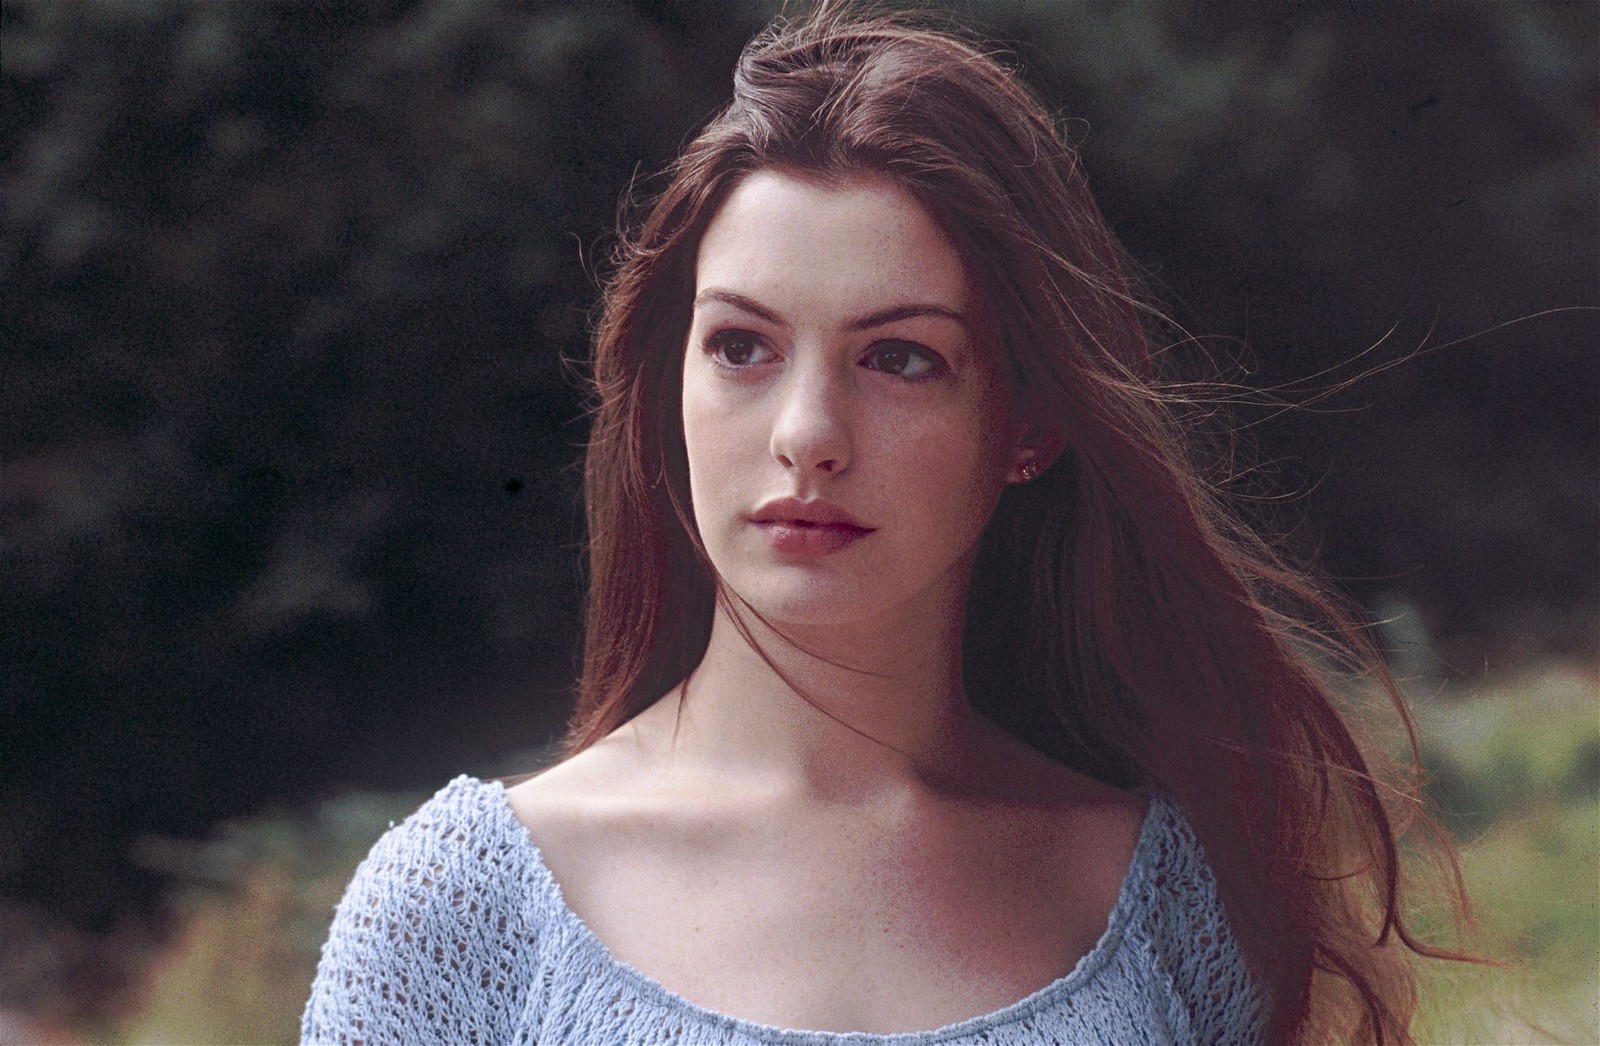 Actress Anne Hathaway stands amidst a field in Ella Enchanted